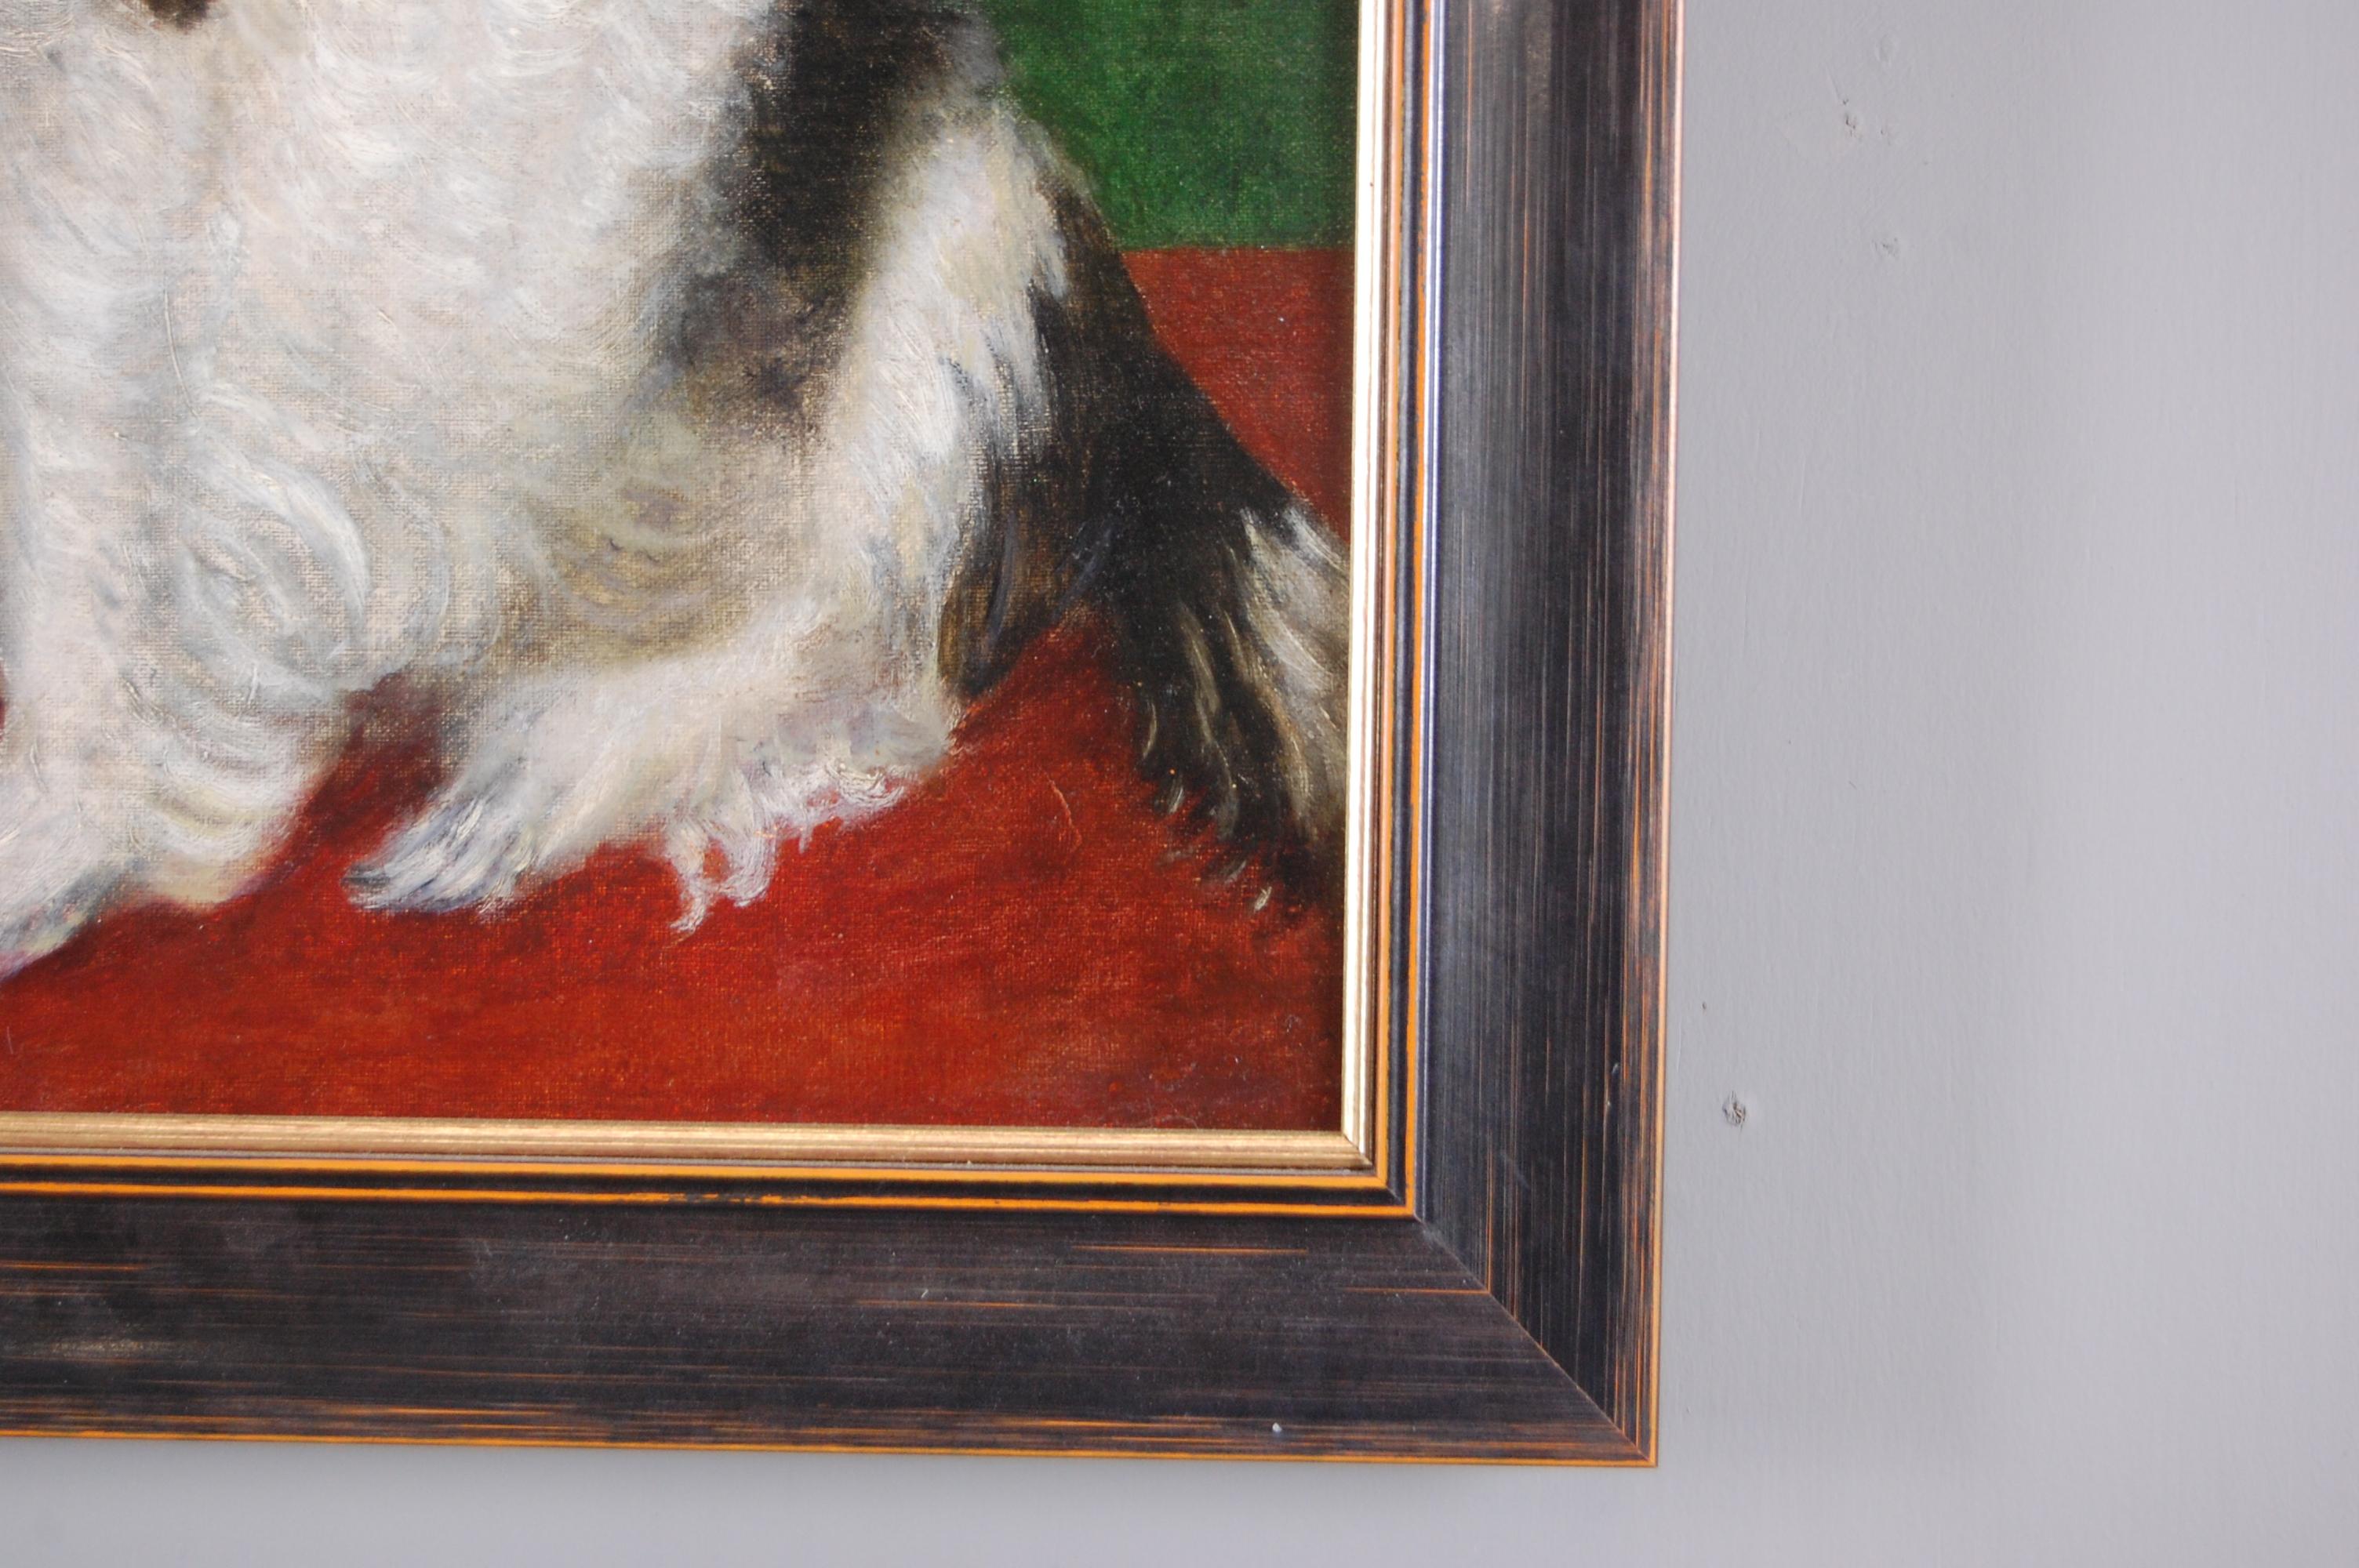 Painted 19th Century Oil on Canvas Portrait of a King Charles Spaniel